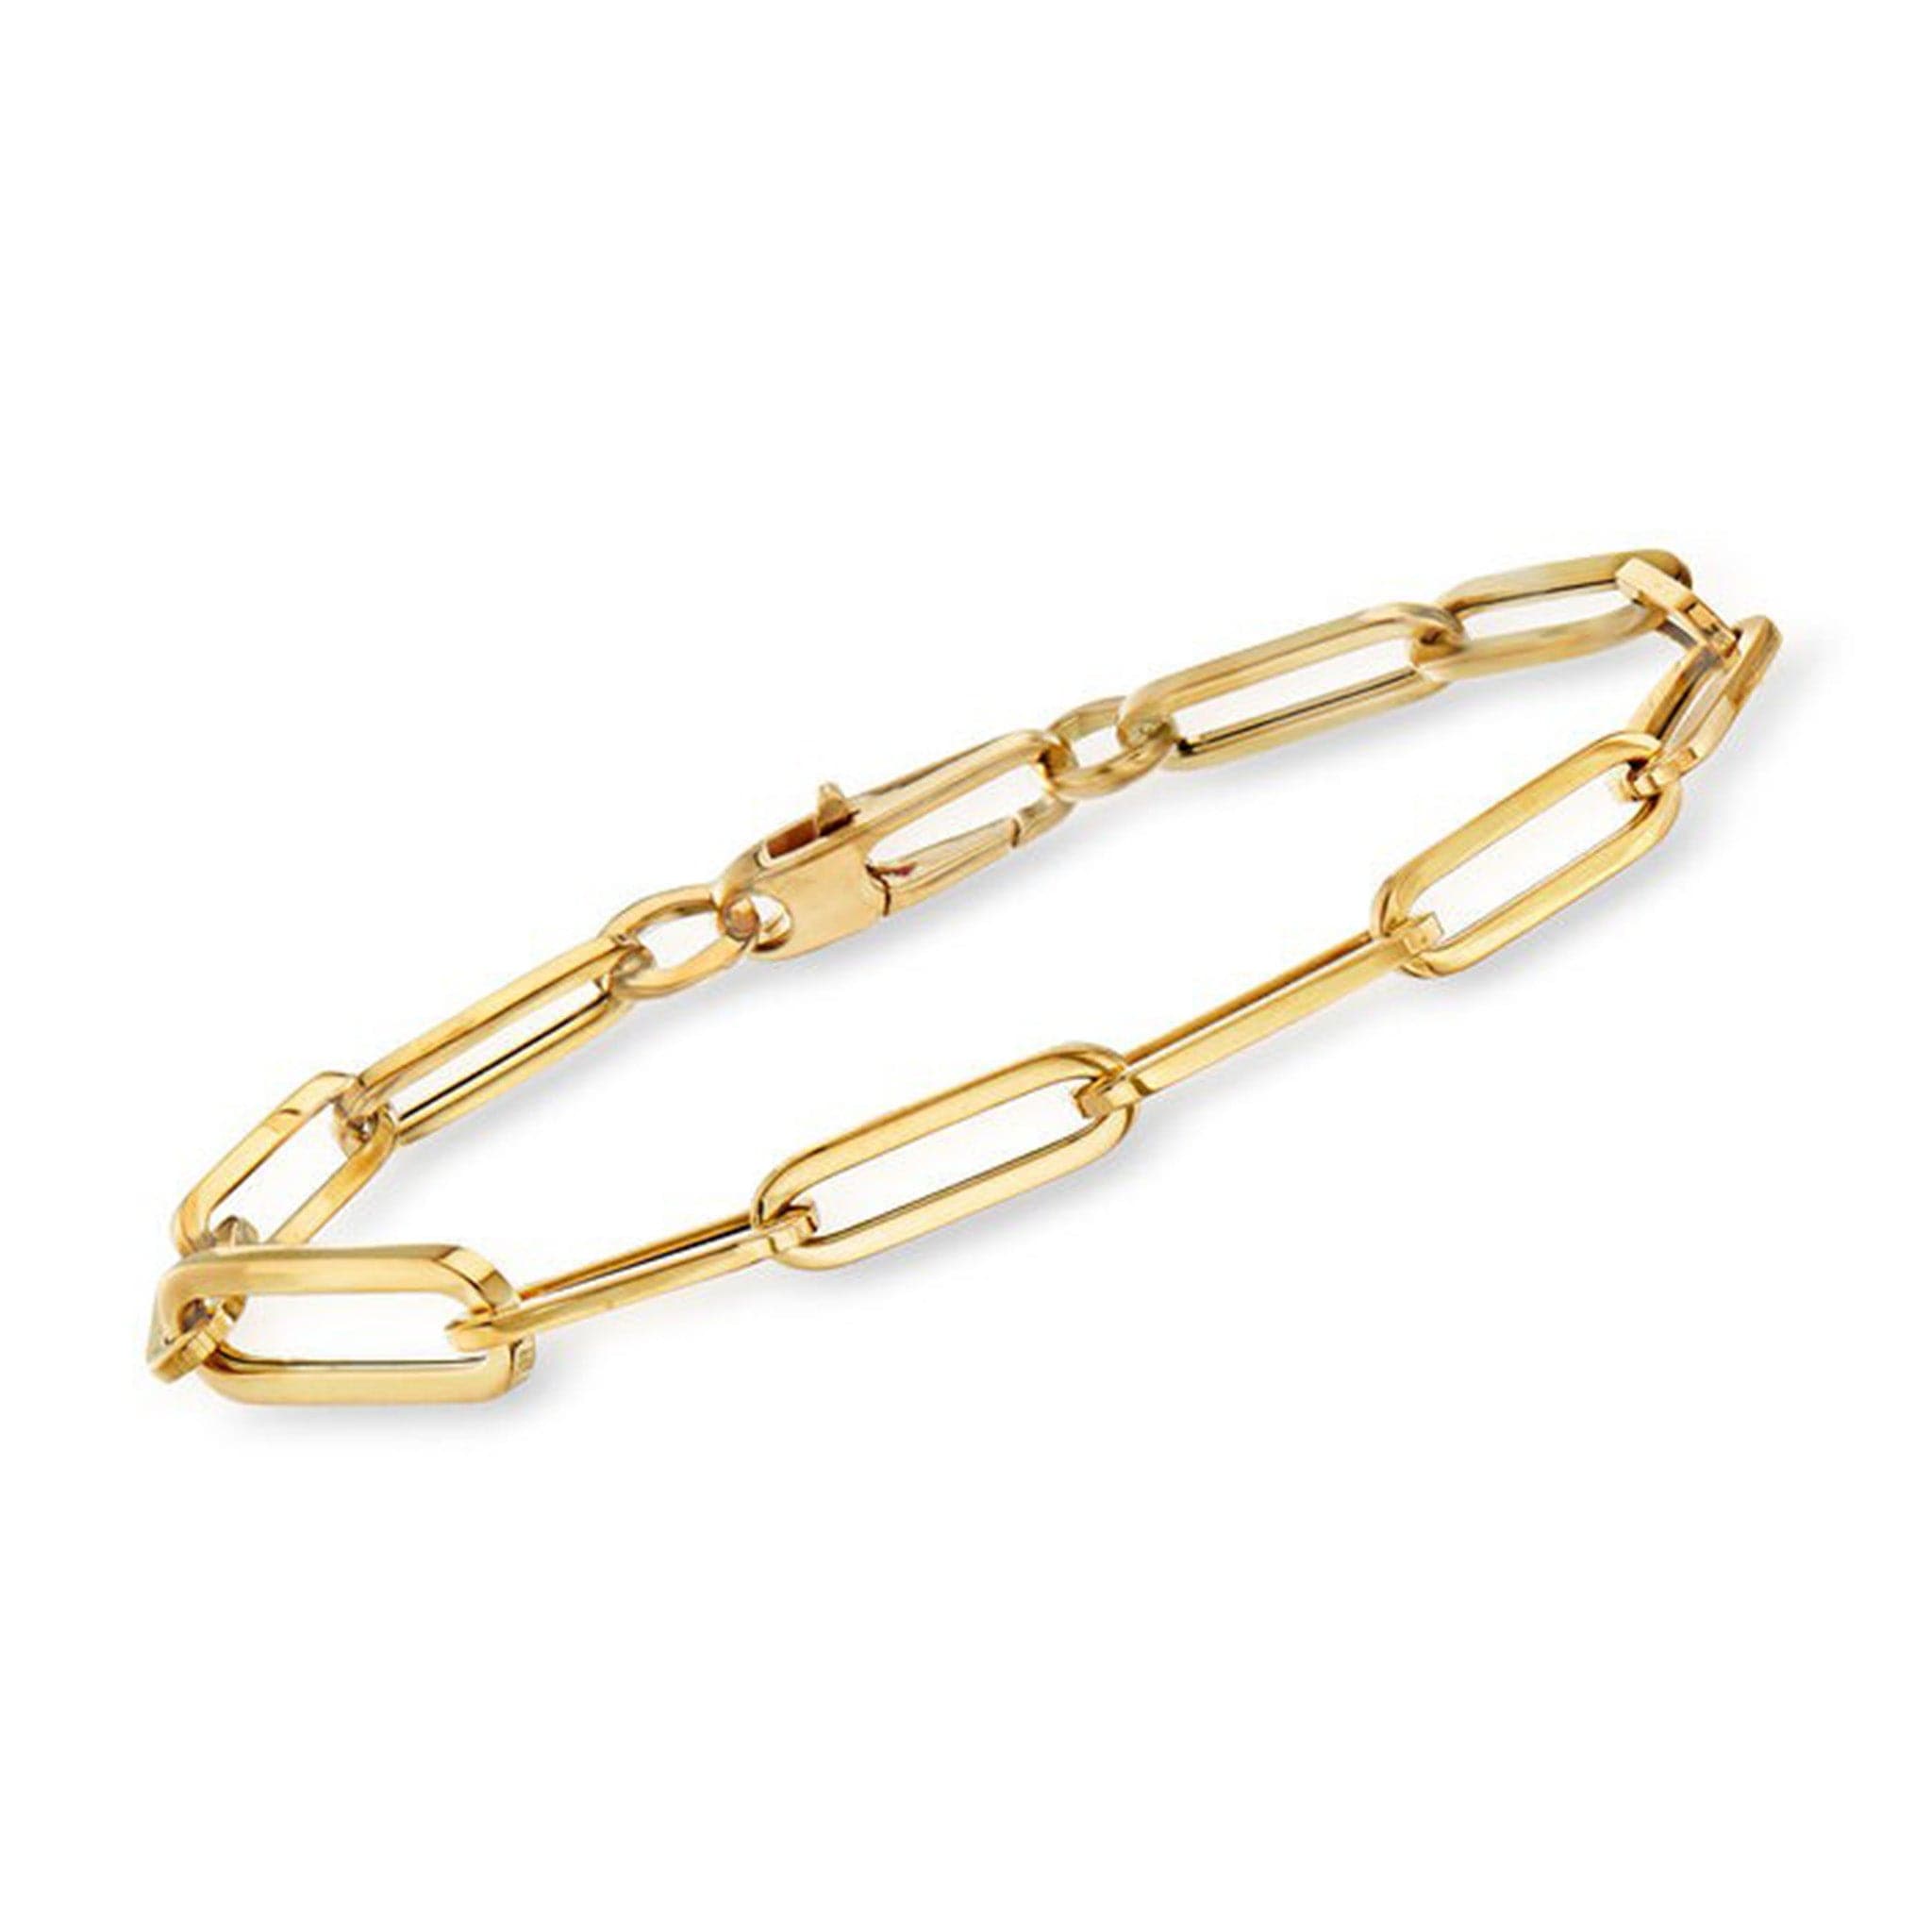 Roberto Coin Thin Paper Clip Link Necklace in 18K Yellow Gold